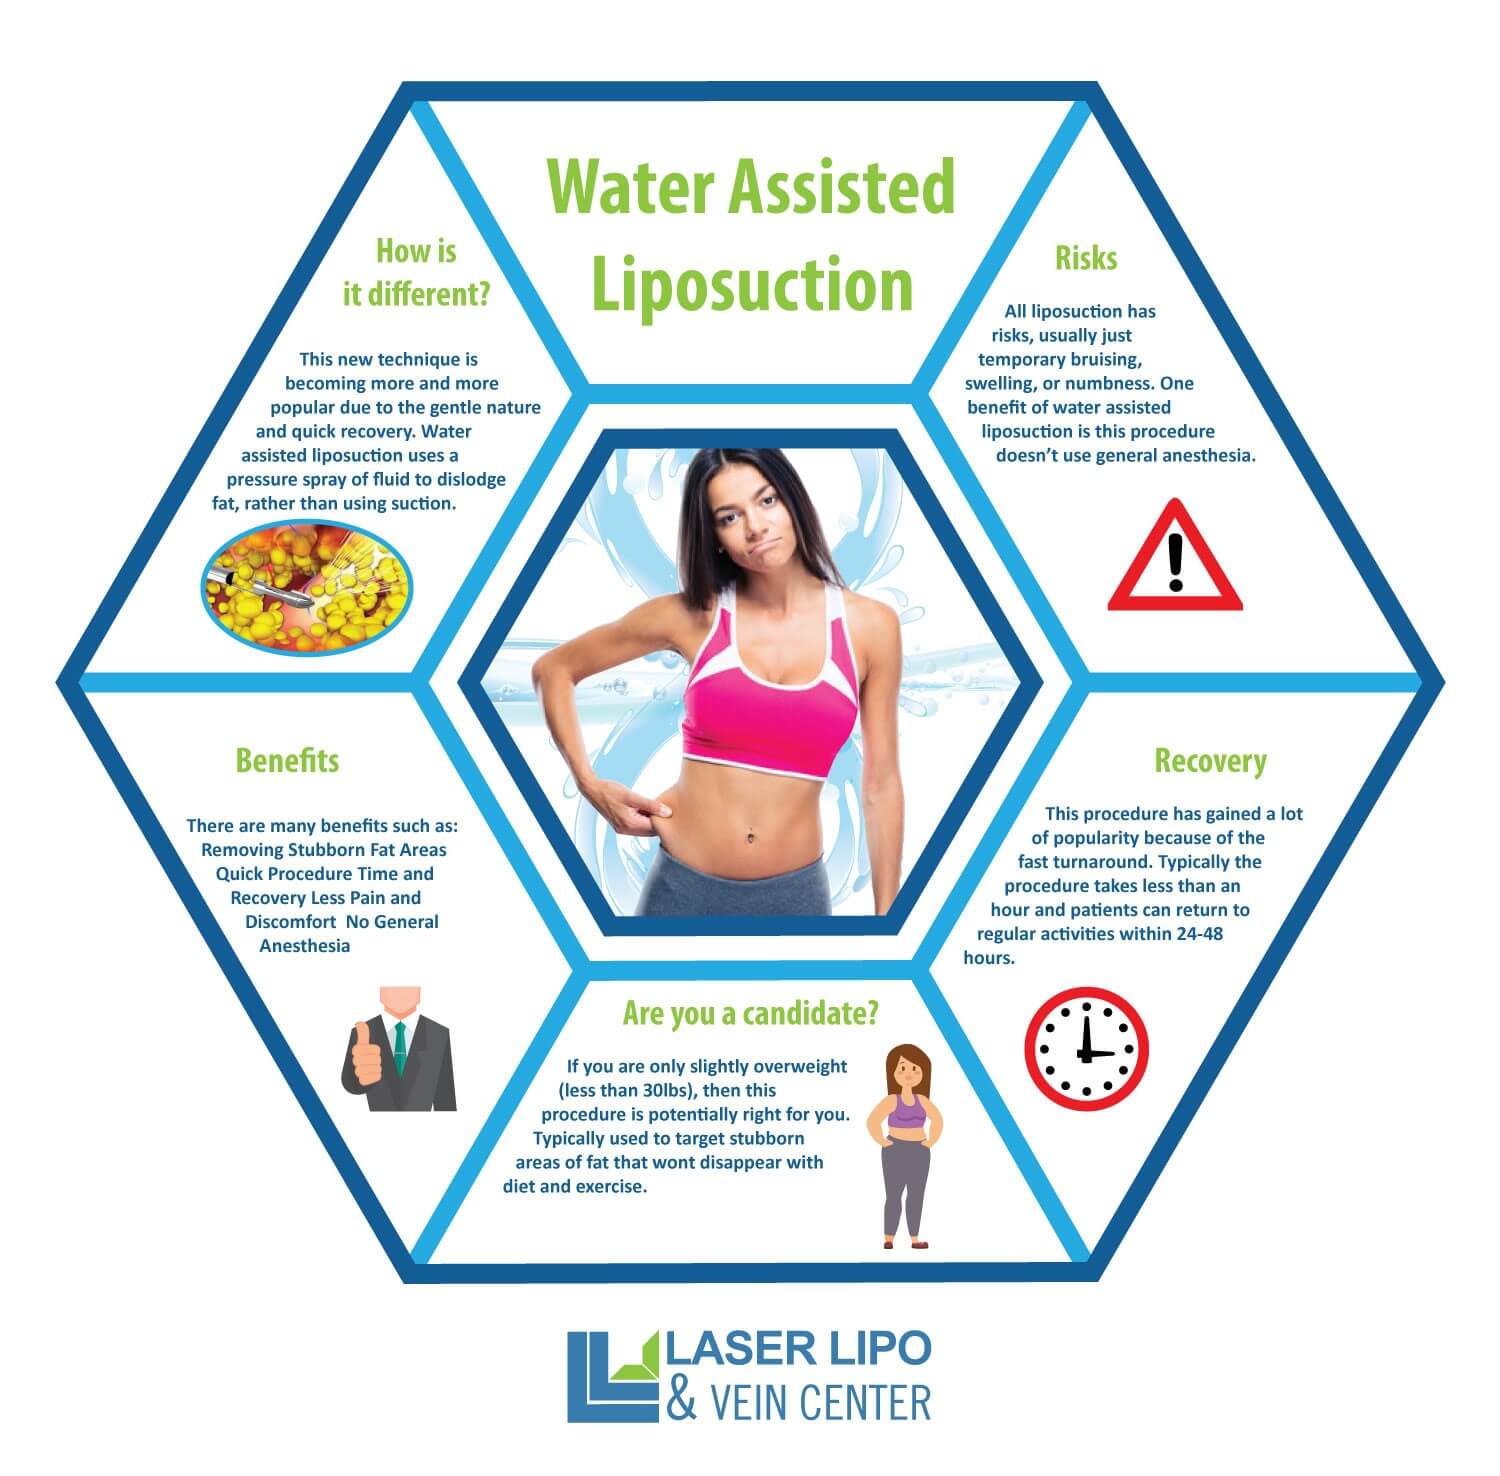 Water Assisted Liposuction - an Infographic